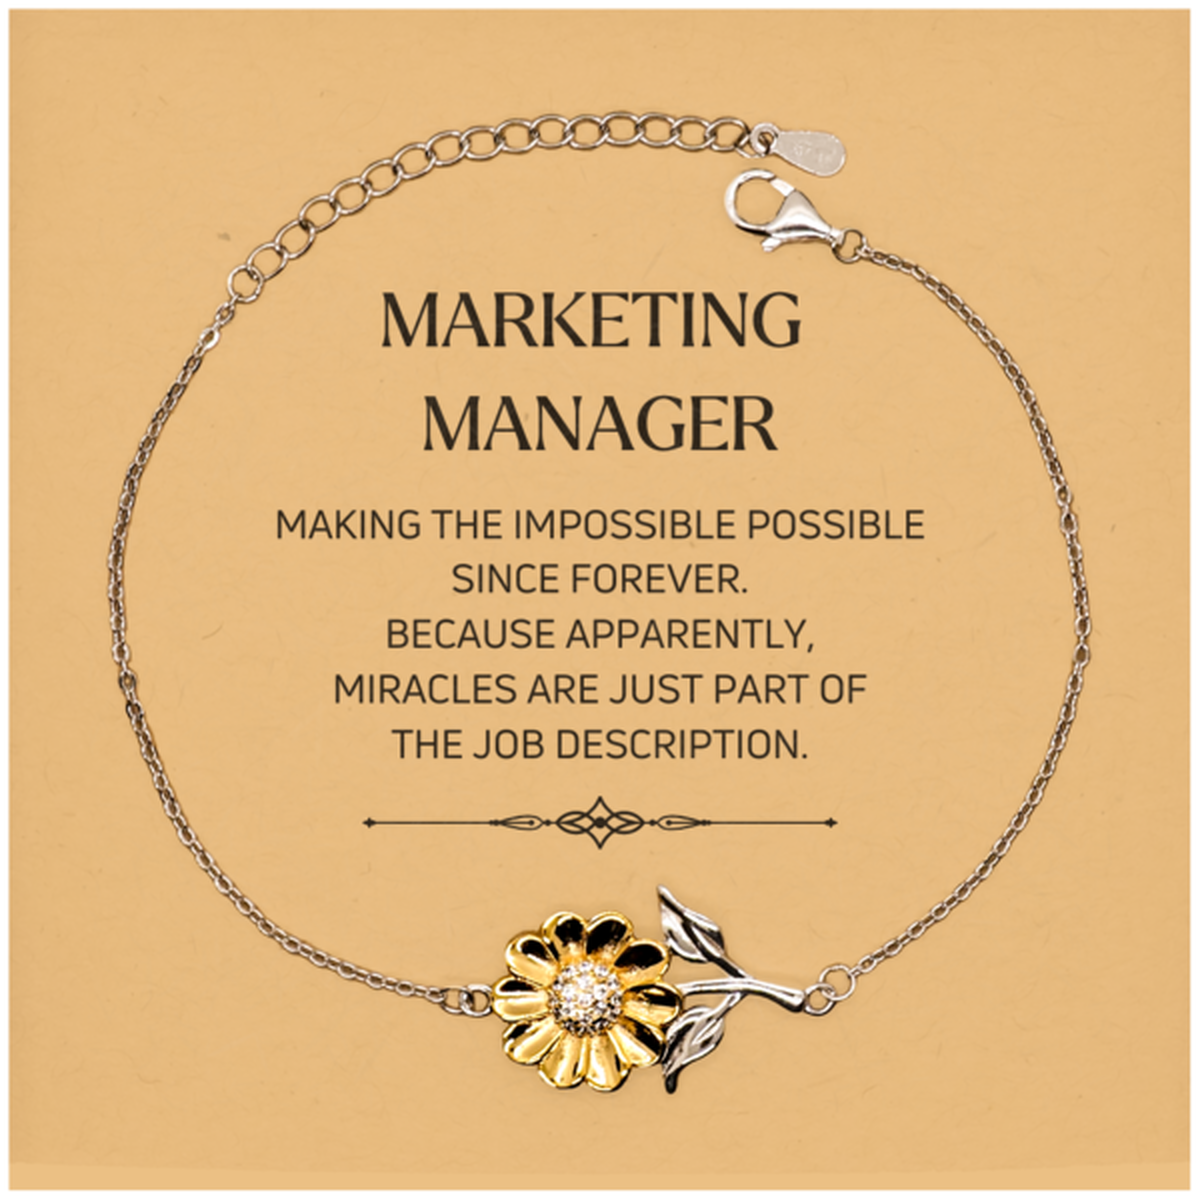 Funny Marketing Manager Gifts, Miracles are just part of the job description, Inspirational Birthday Christmas Sunflower Bracelet For Marketing Manager, Men, Women, Coworkers, Friends, Boss